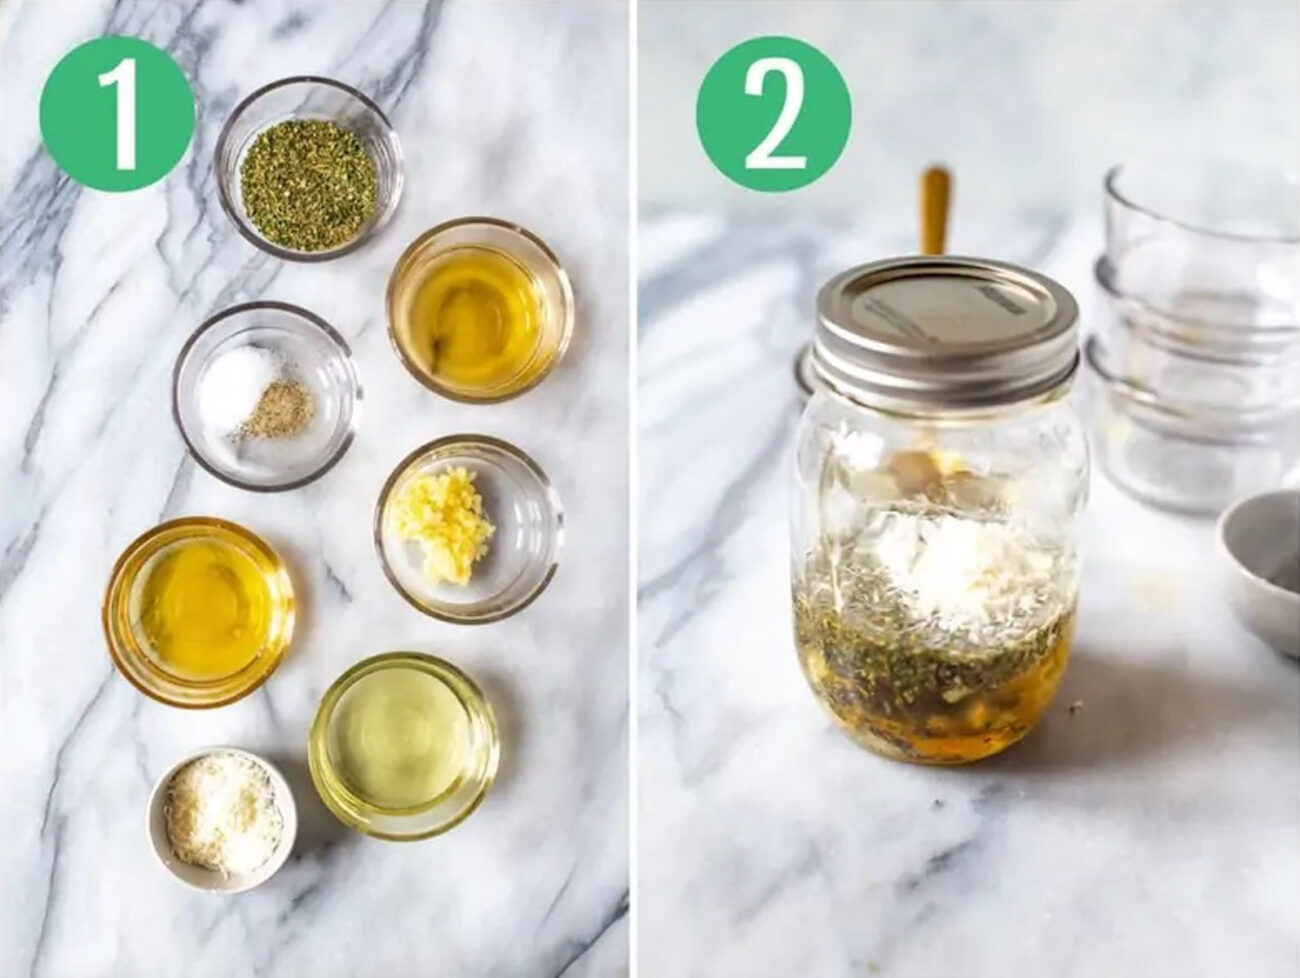 Steps 1 and 2 for making homemade salad dressing: Assemble ingredients and add everything to mason jar.